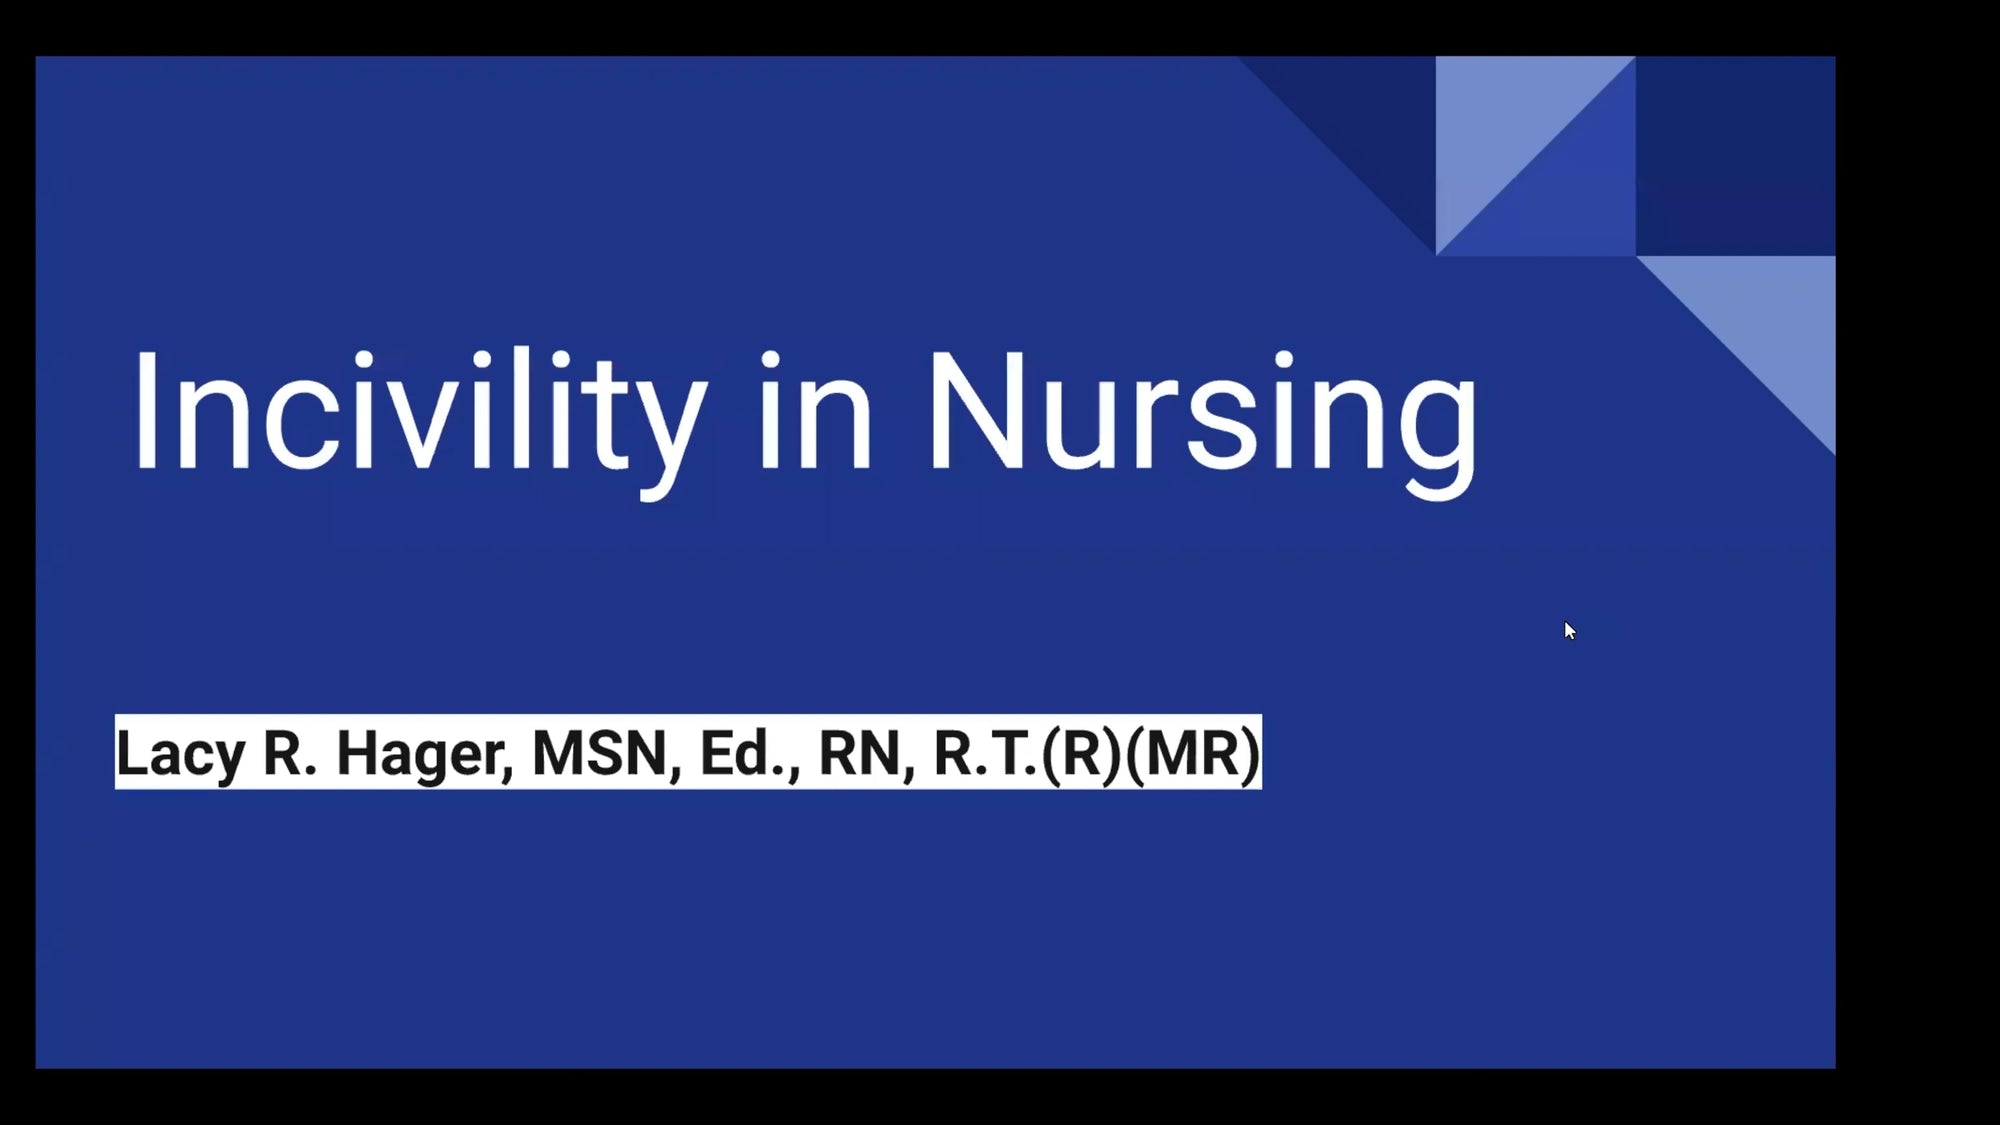 Webinar: How to Stop Incivility & Bullying on a Nursing Unit - LevelUpRN